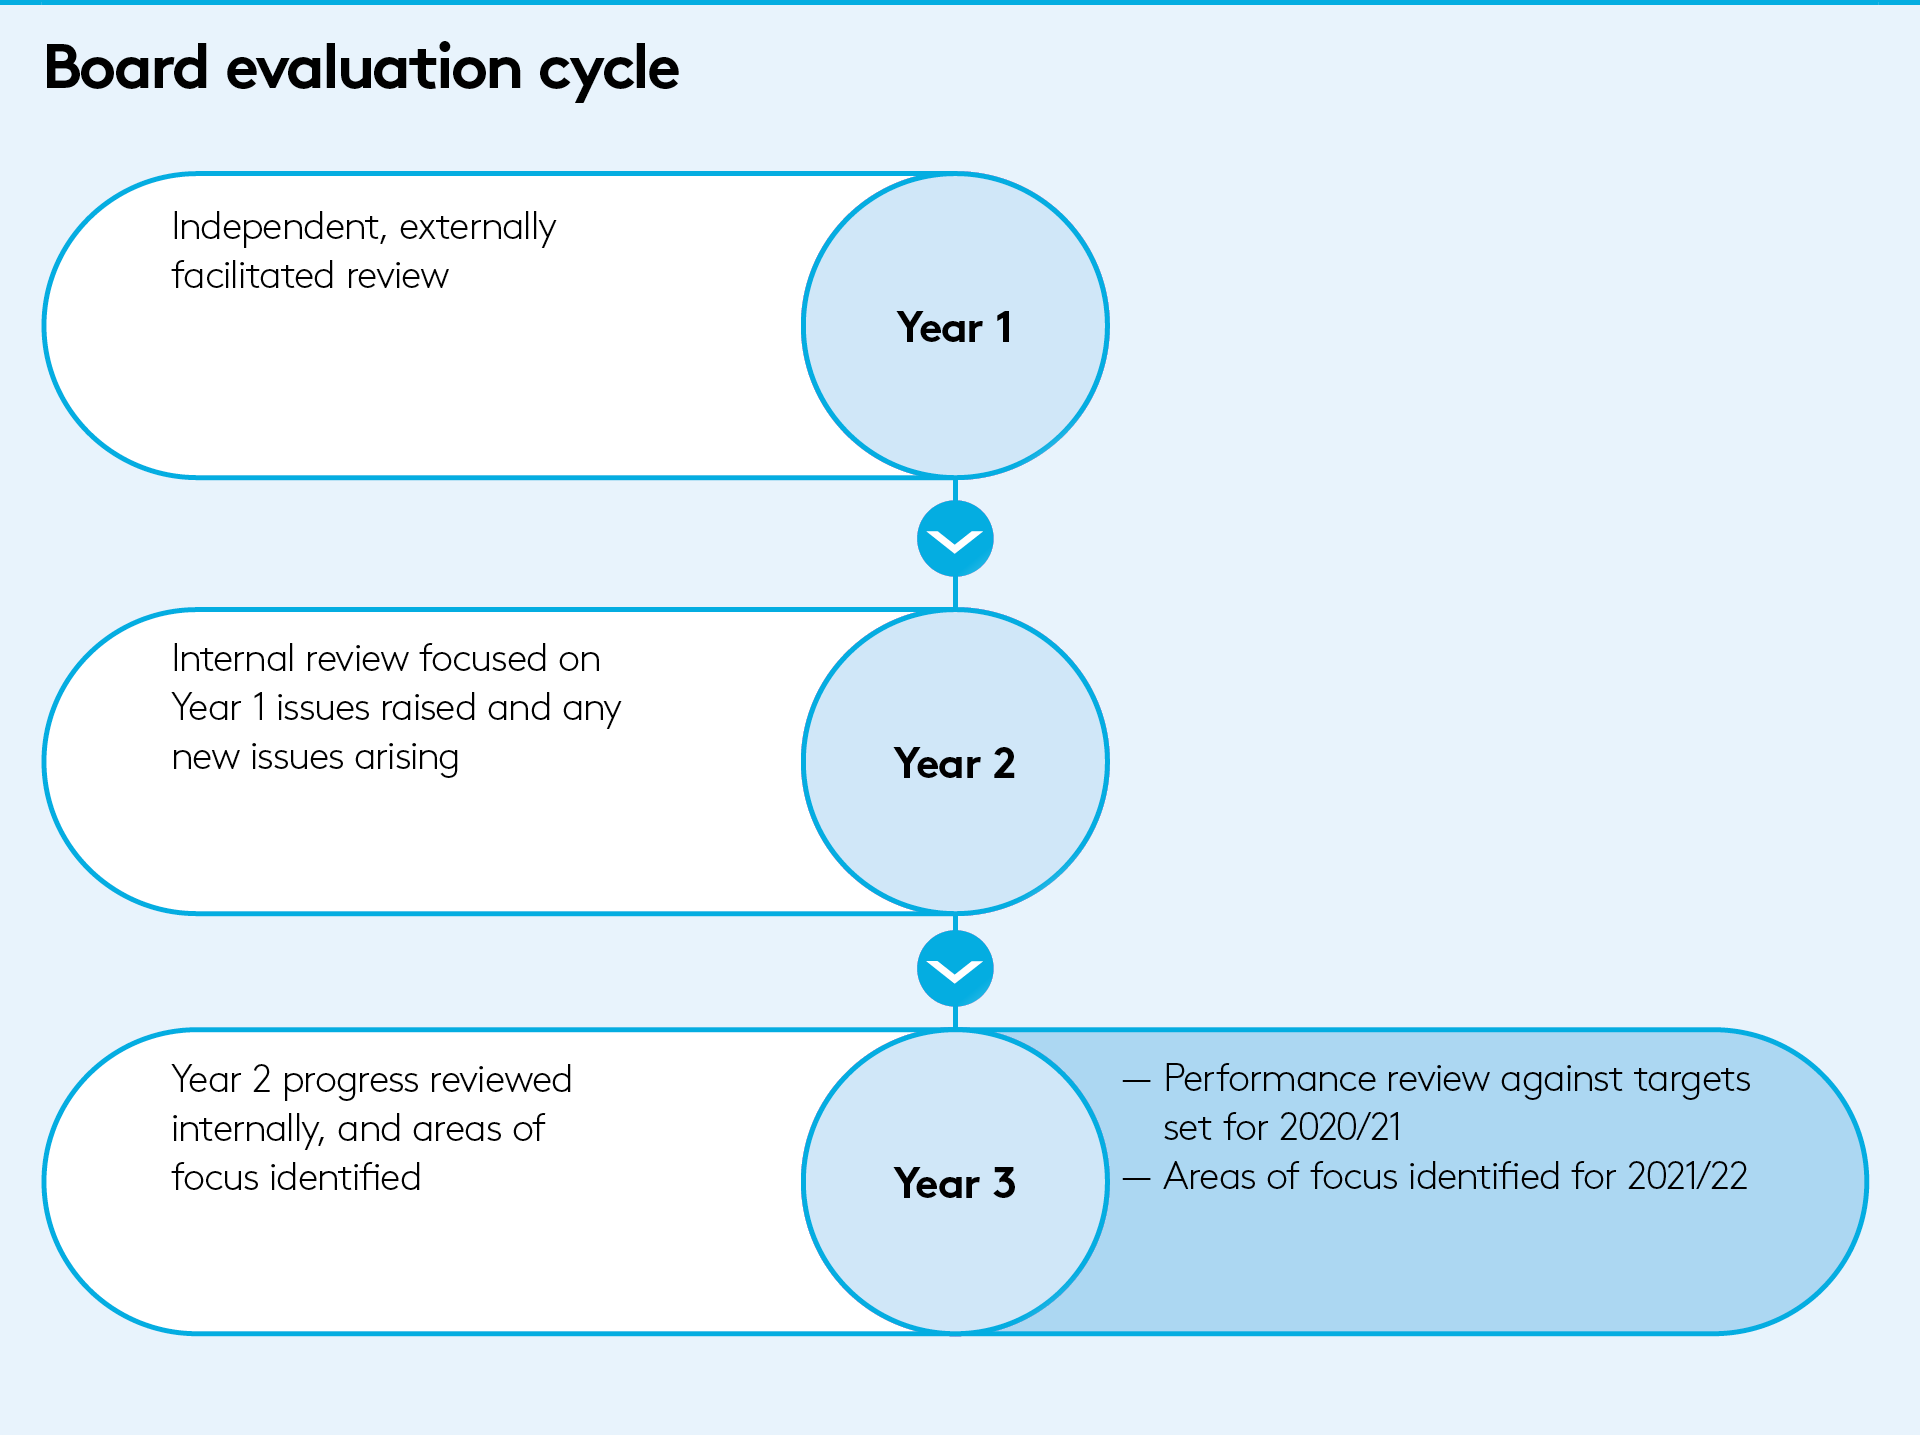 Board evaluation cycle 2021